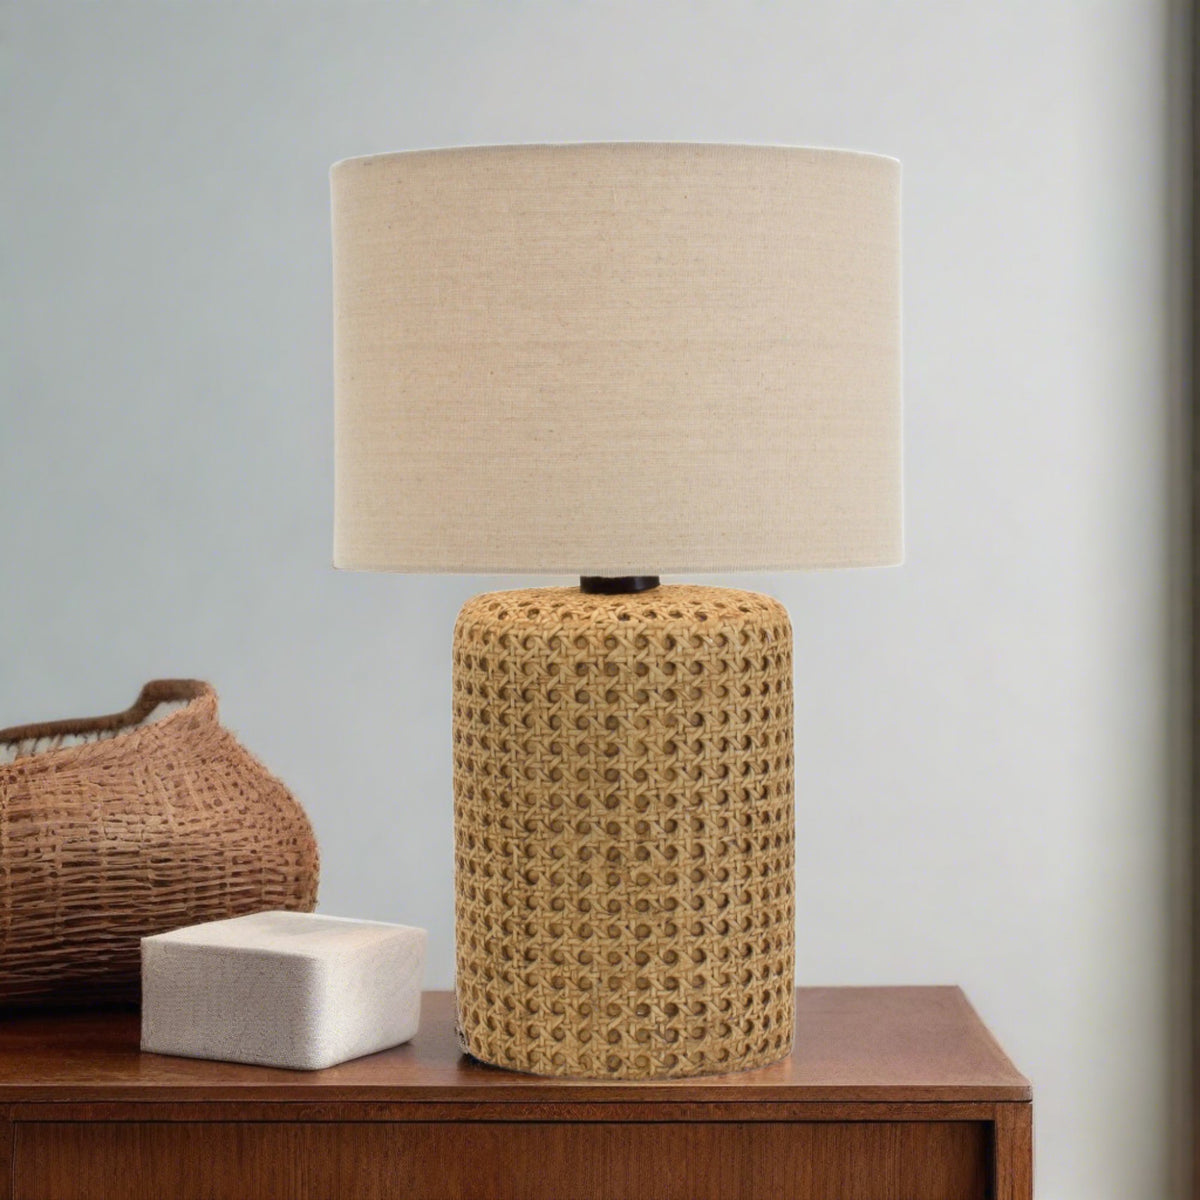 Rattan Style Table Lamp